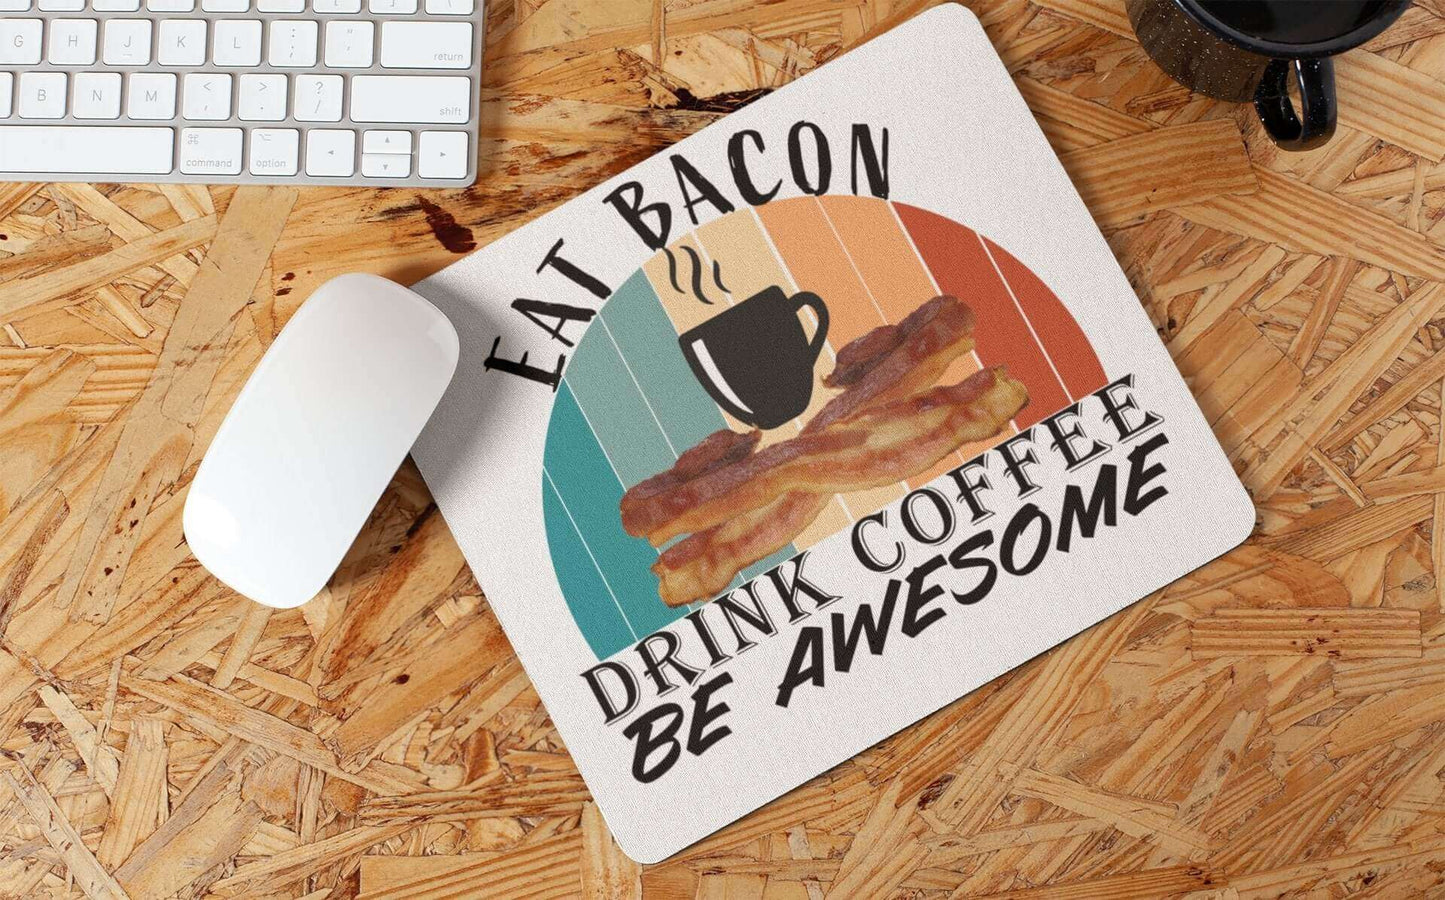 Eat Bacon, Drink Coffee, Be Awesome - Mouse pad - Horrible Designs